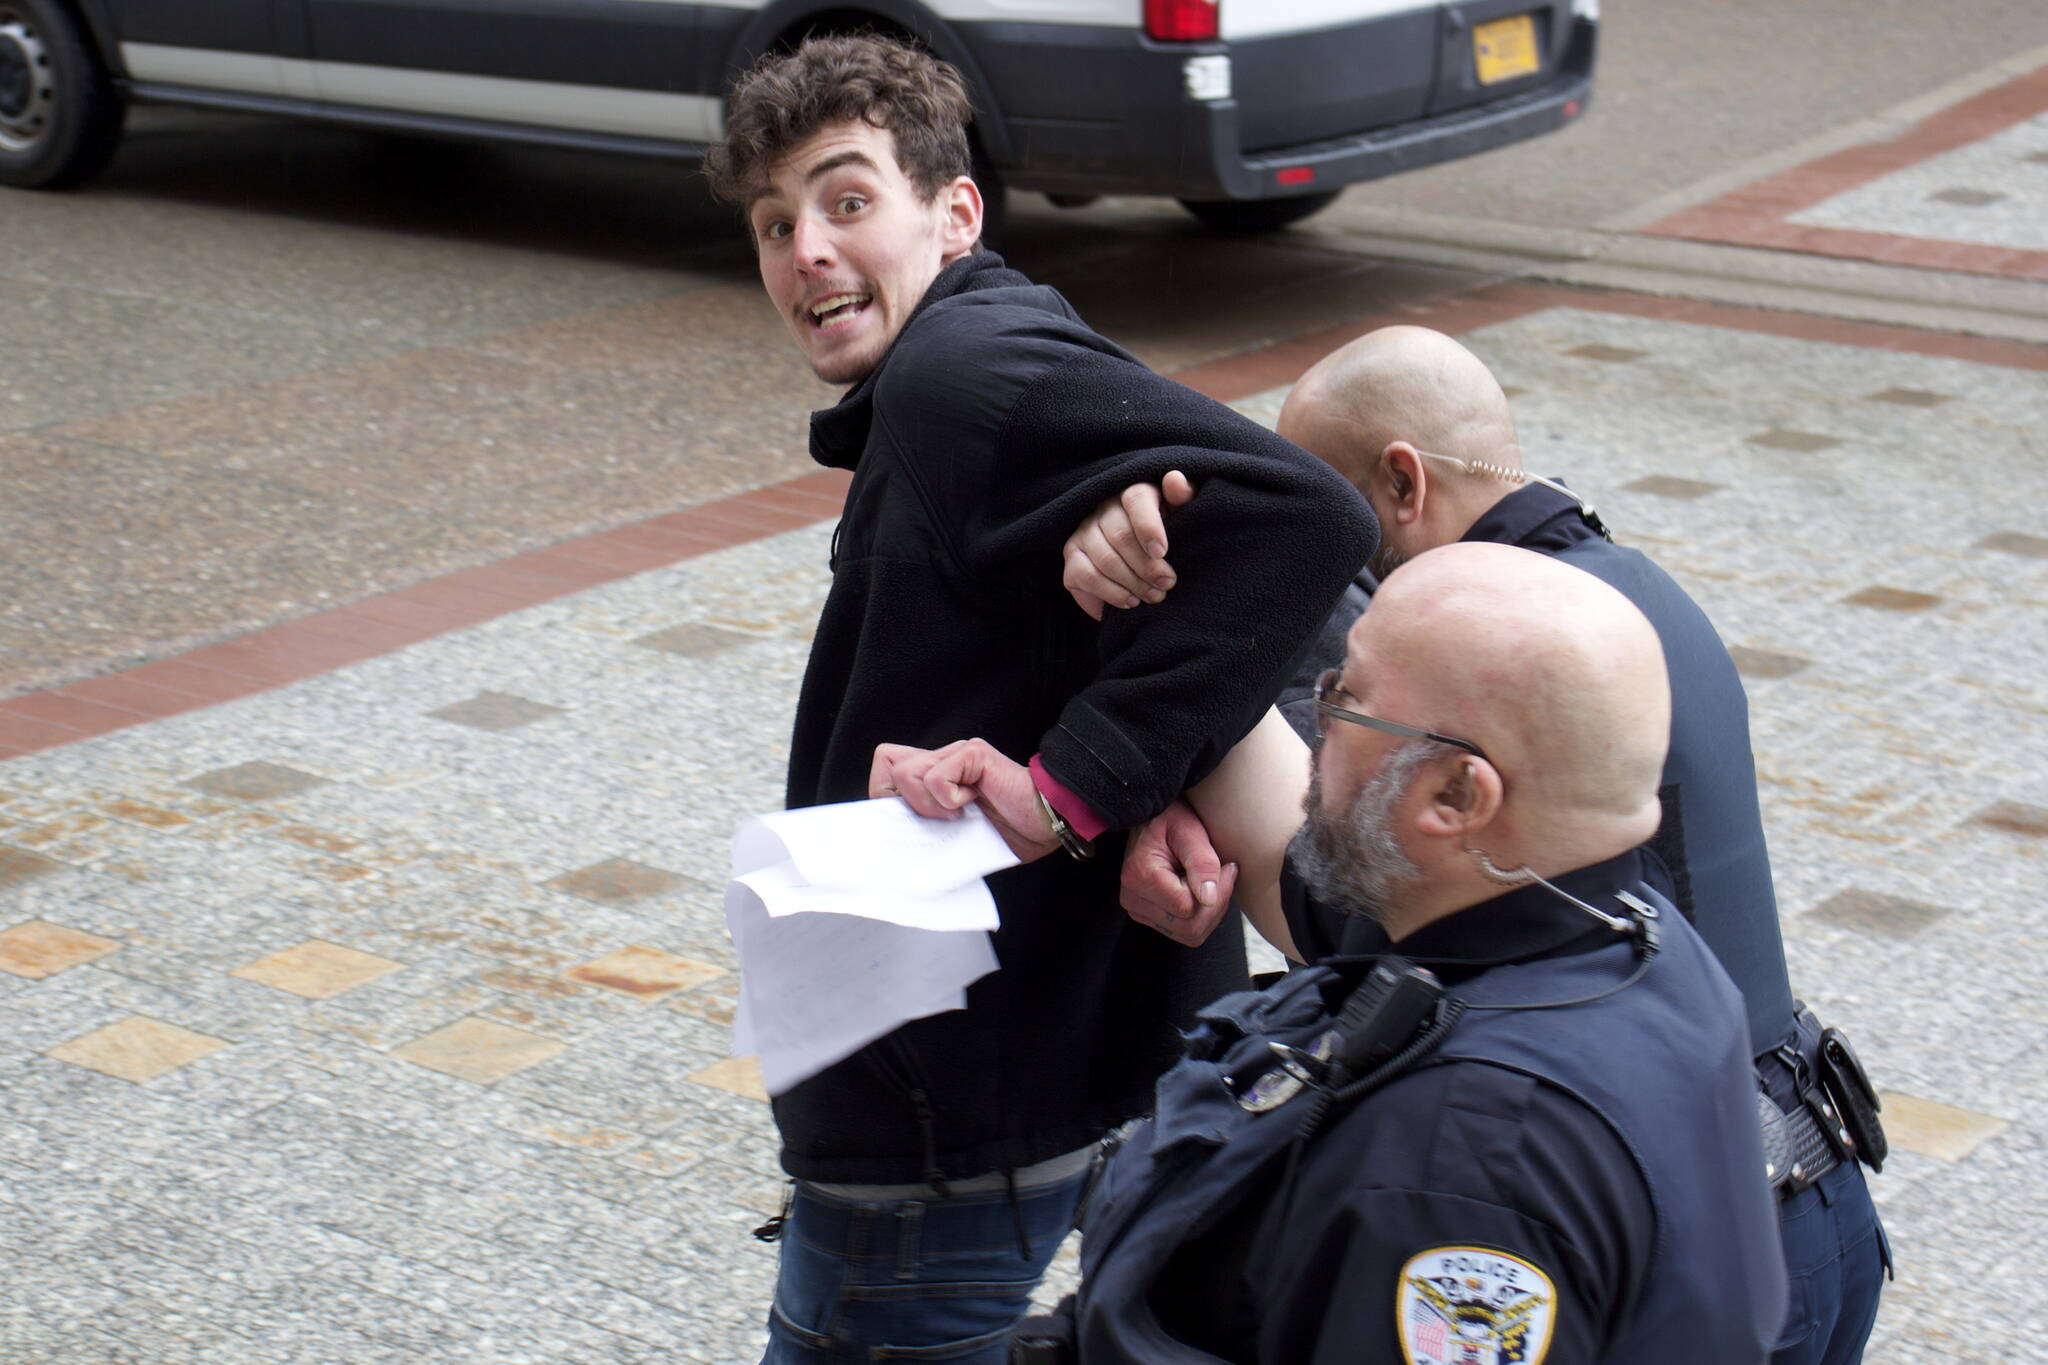 Eric Osuch tries to offer papers related to his arrest in front of the Alaska State Capitol on Monday morning to a reporter as Juneau Police Department officers escort him to a nearby patrol vehicle. Osuch, who was staging a solo protest about fisheries bycatch policies, was banned from the Capitol after causing a public disruption and was arrested a short time later for another alleged disturbance inside the State Office Building. (Mark Sabbatini / Juneau Empire)